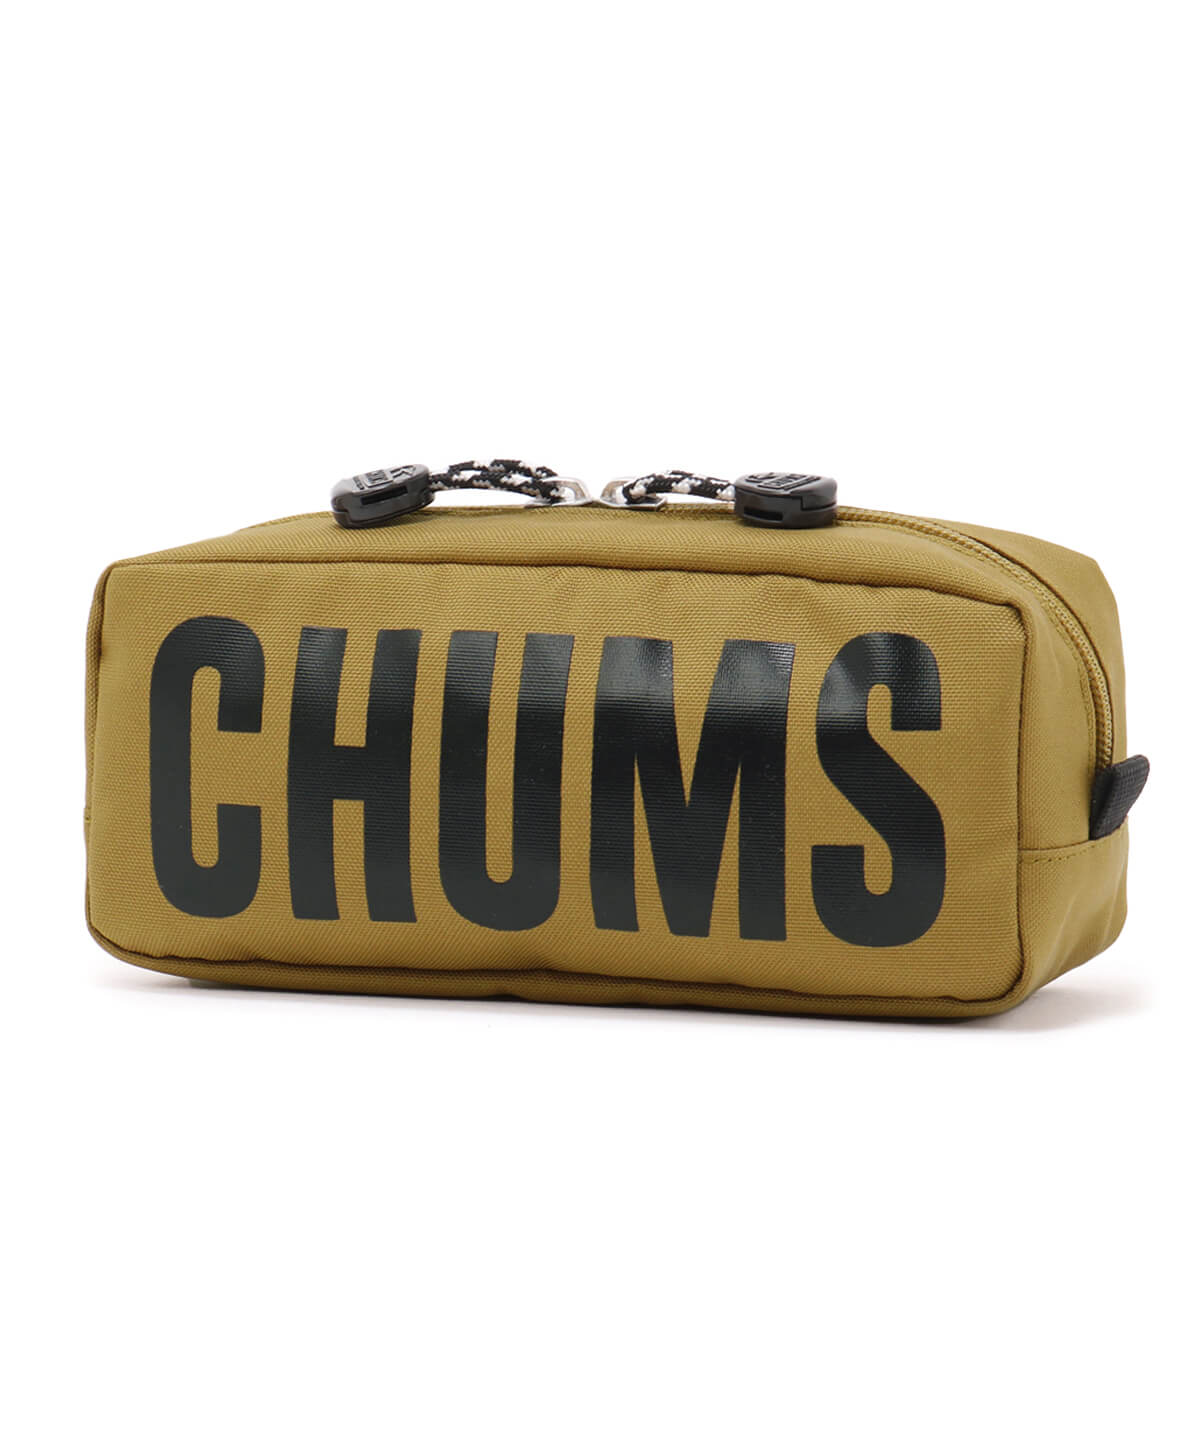 Recycle CHUMS Pouch(リサイクルチャムスポーチ(ポーチ｜ケース))